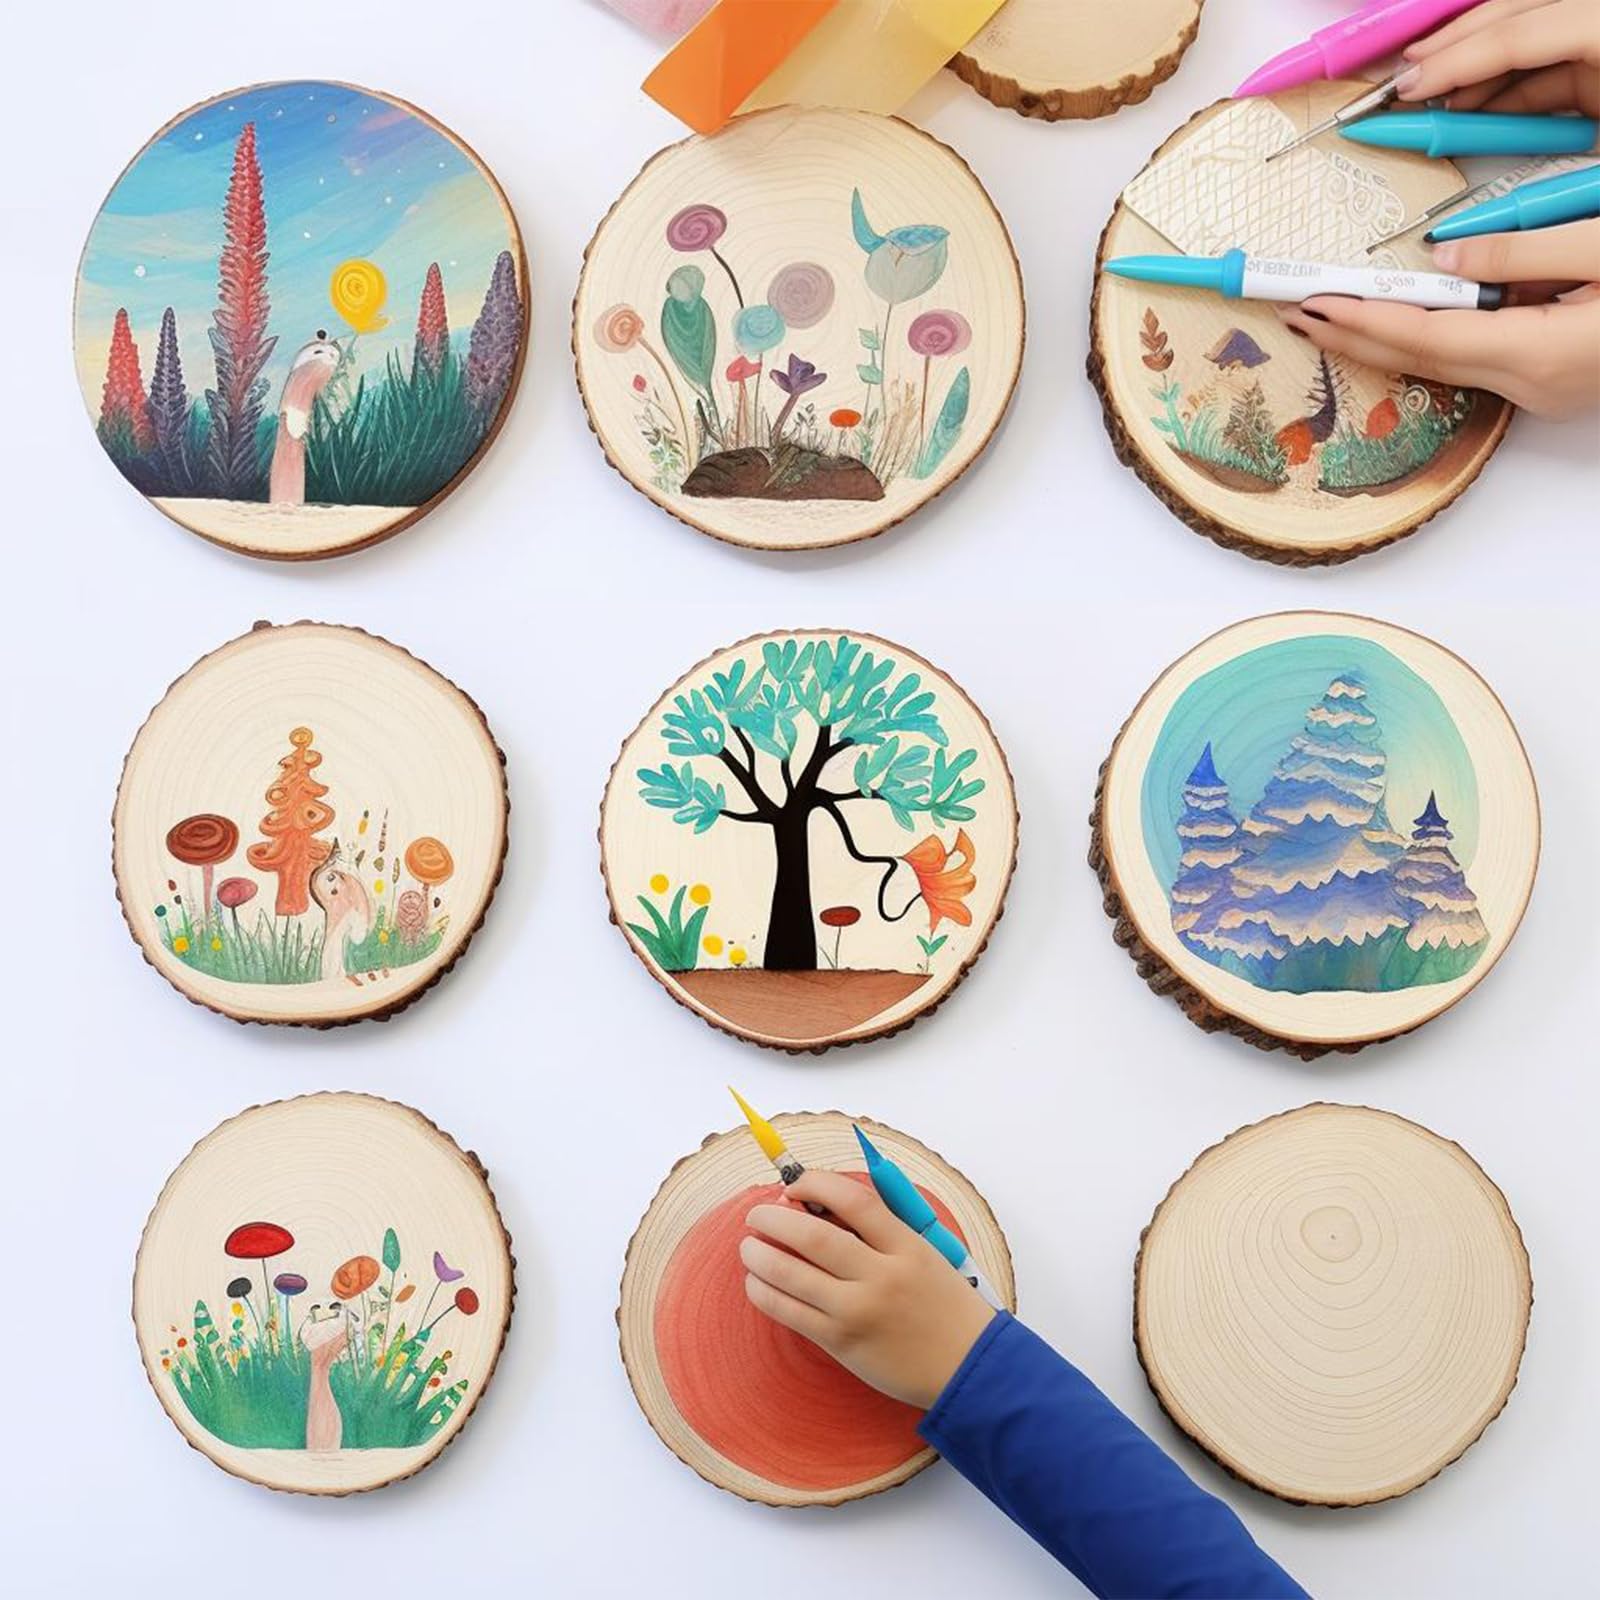 10Pcs Wood Slices, 5.5-6.3 inch Unfinished Natural Wood Slices, Large Wood  Circles with Bark, Rustic Round Wooden Slices for Centerpieces Wedding